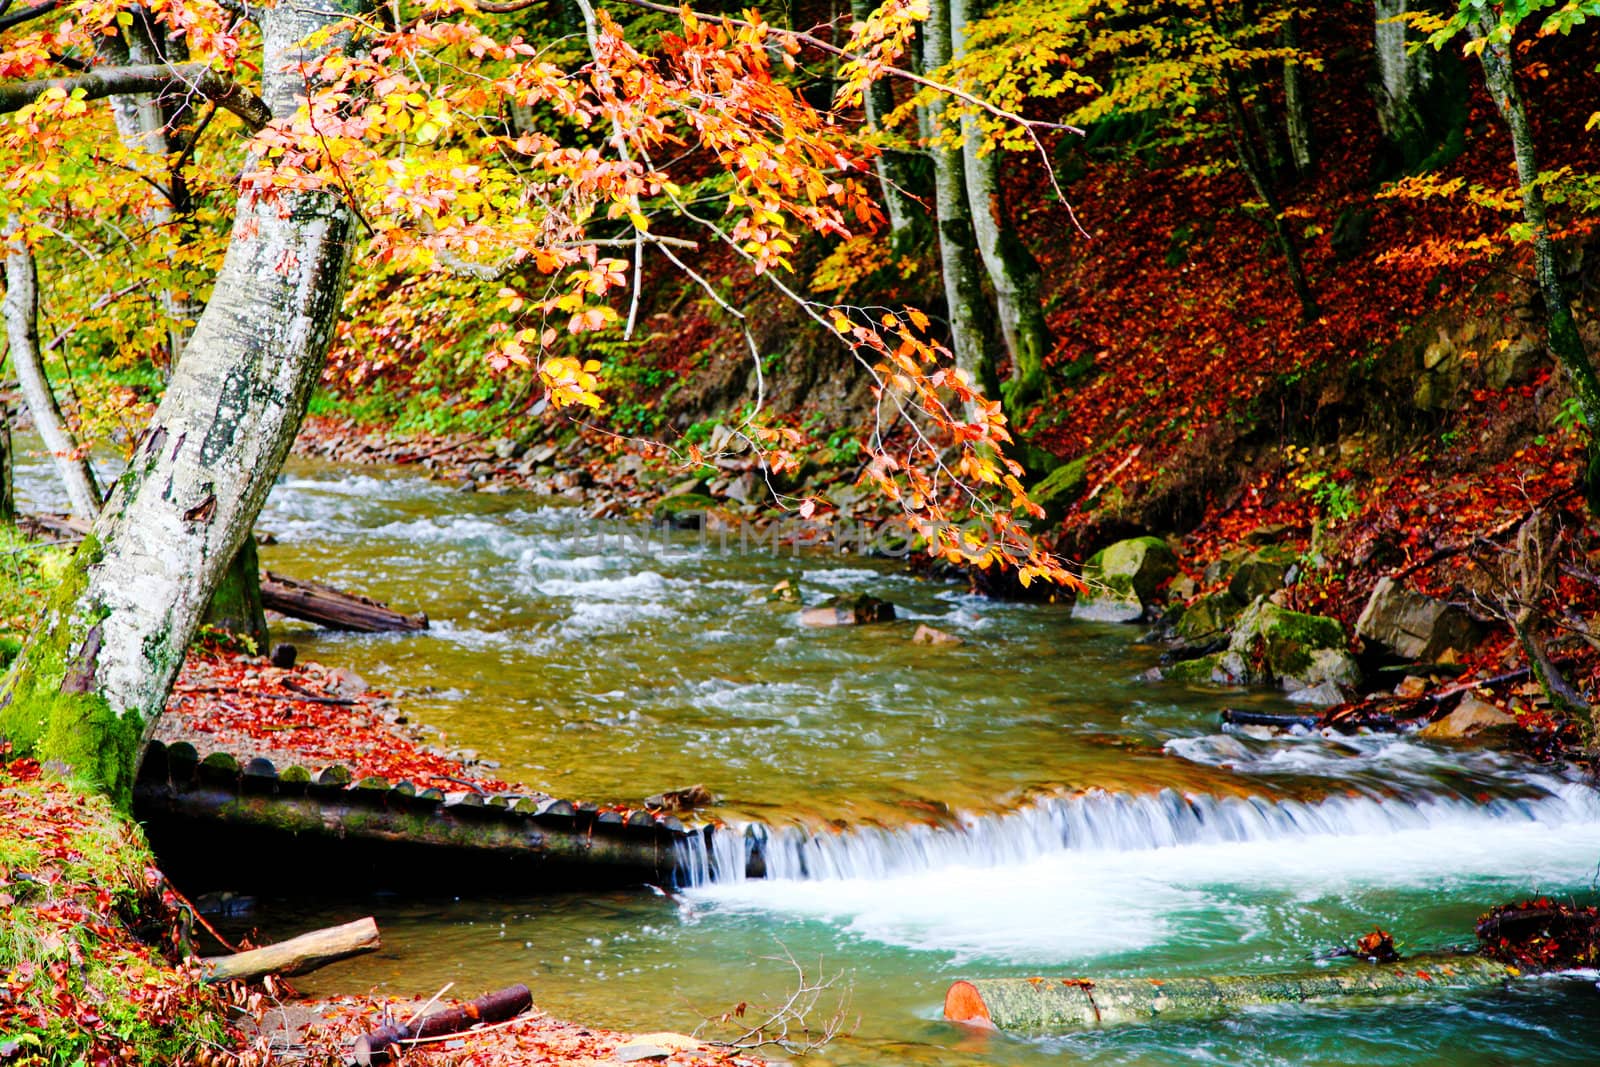 An image of river in autumn mountains